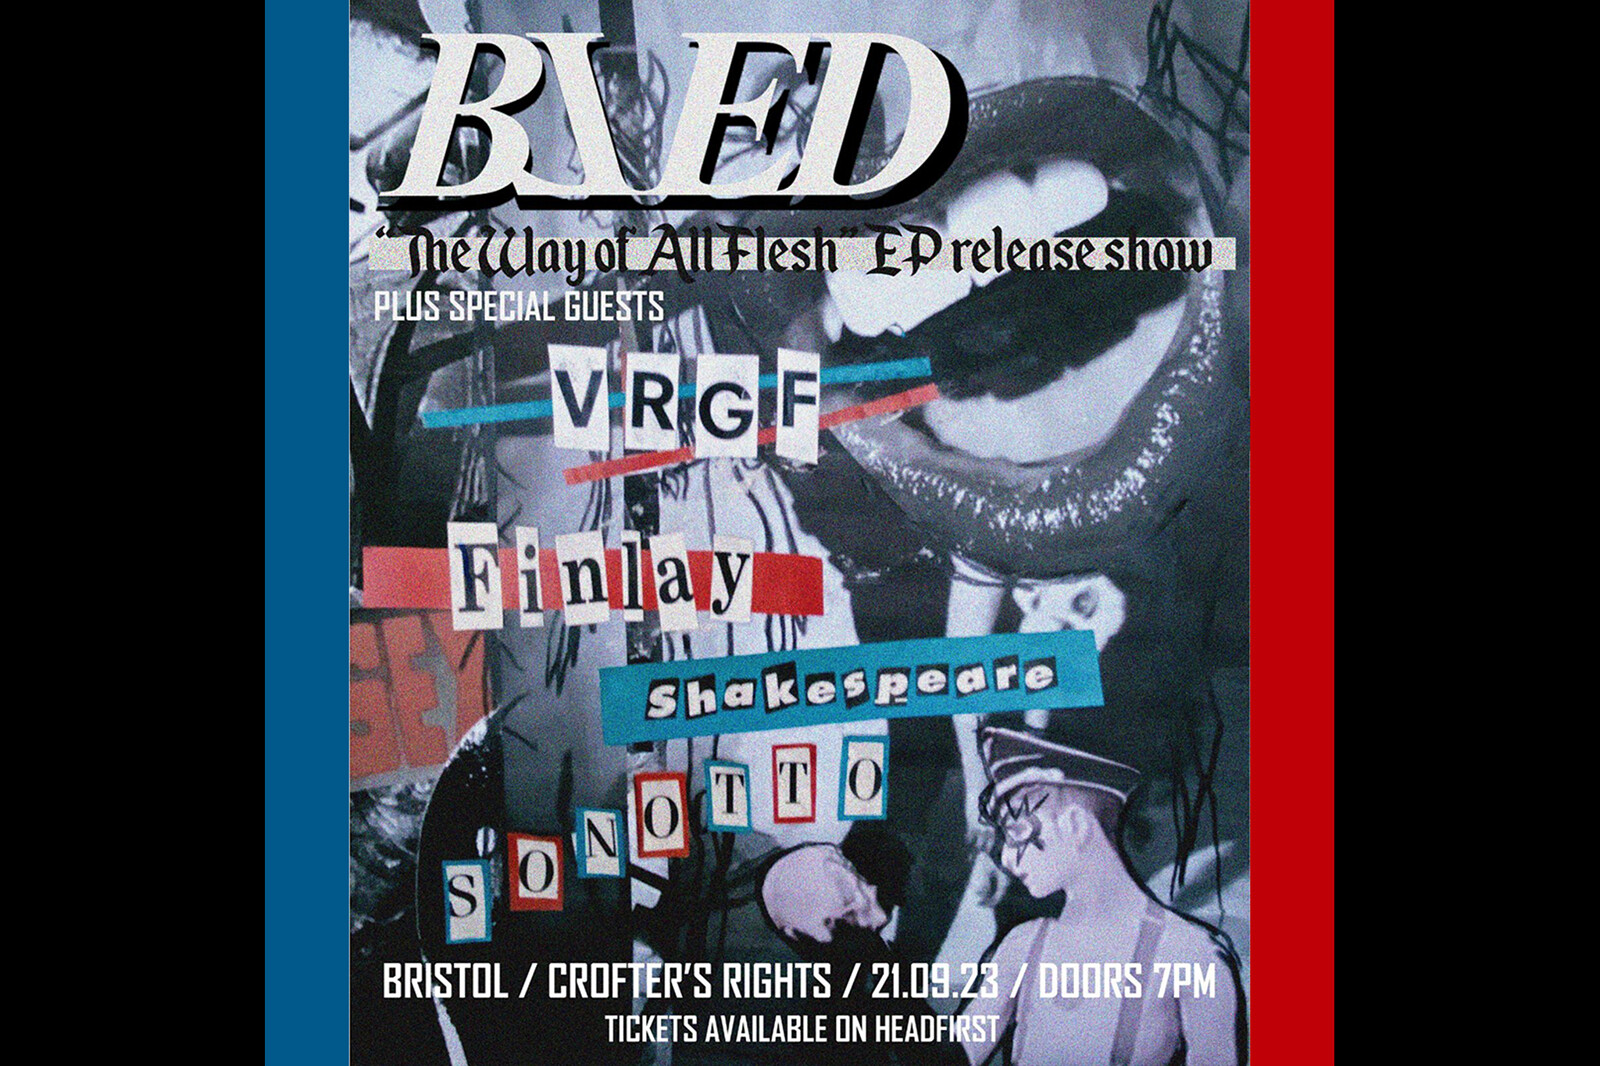 BLED - 'The Way of All Flesh' EP Launch at Crofters Rights